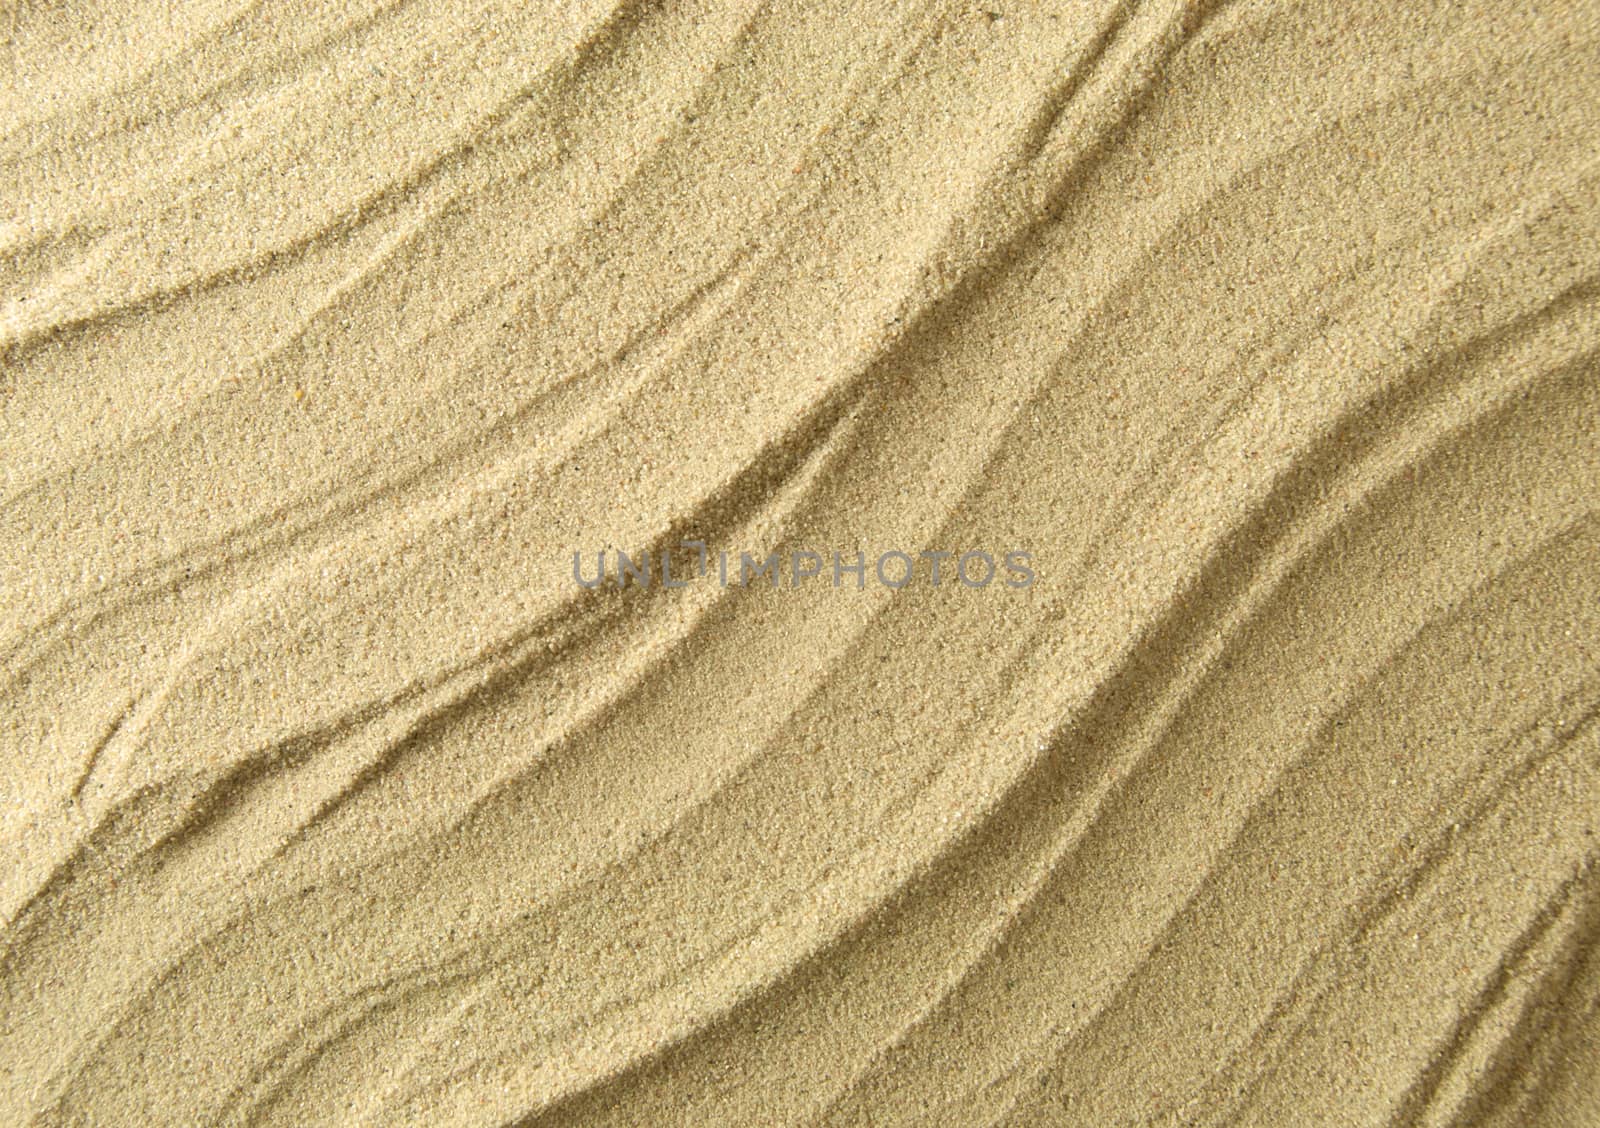 Close up of textured ridges in the sand